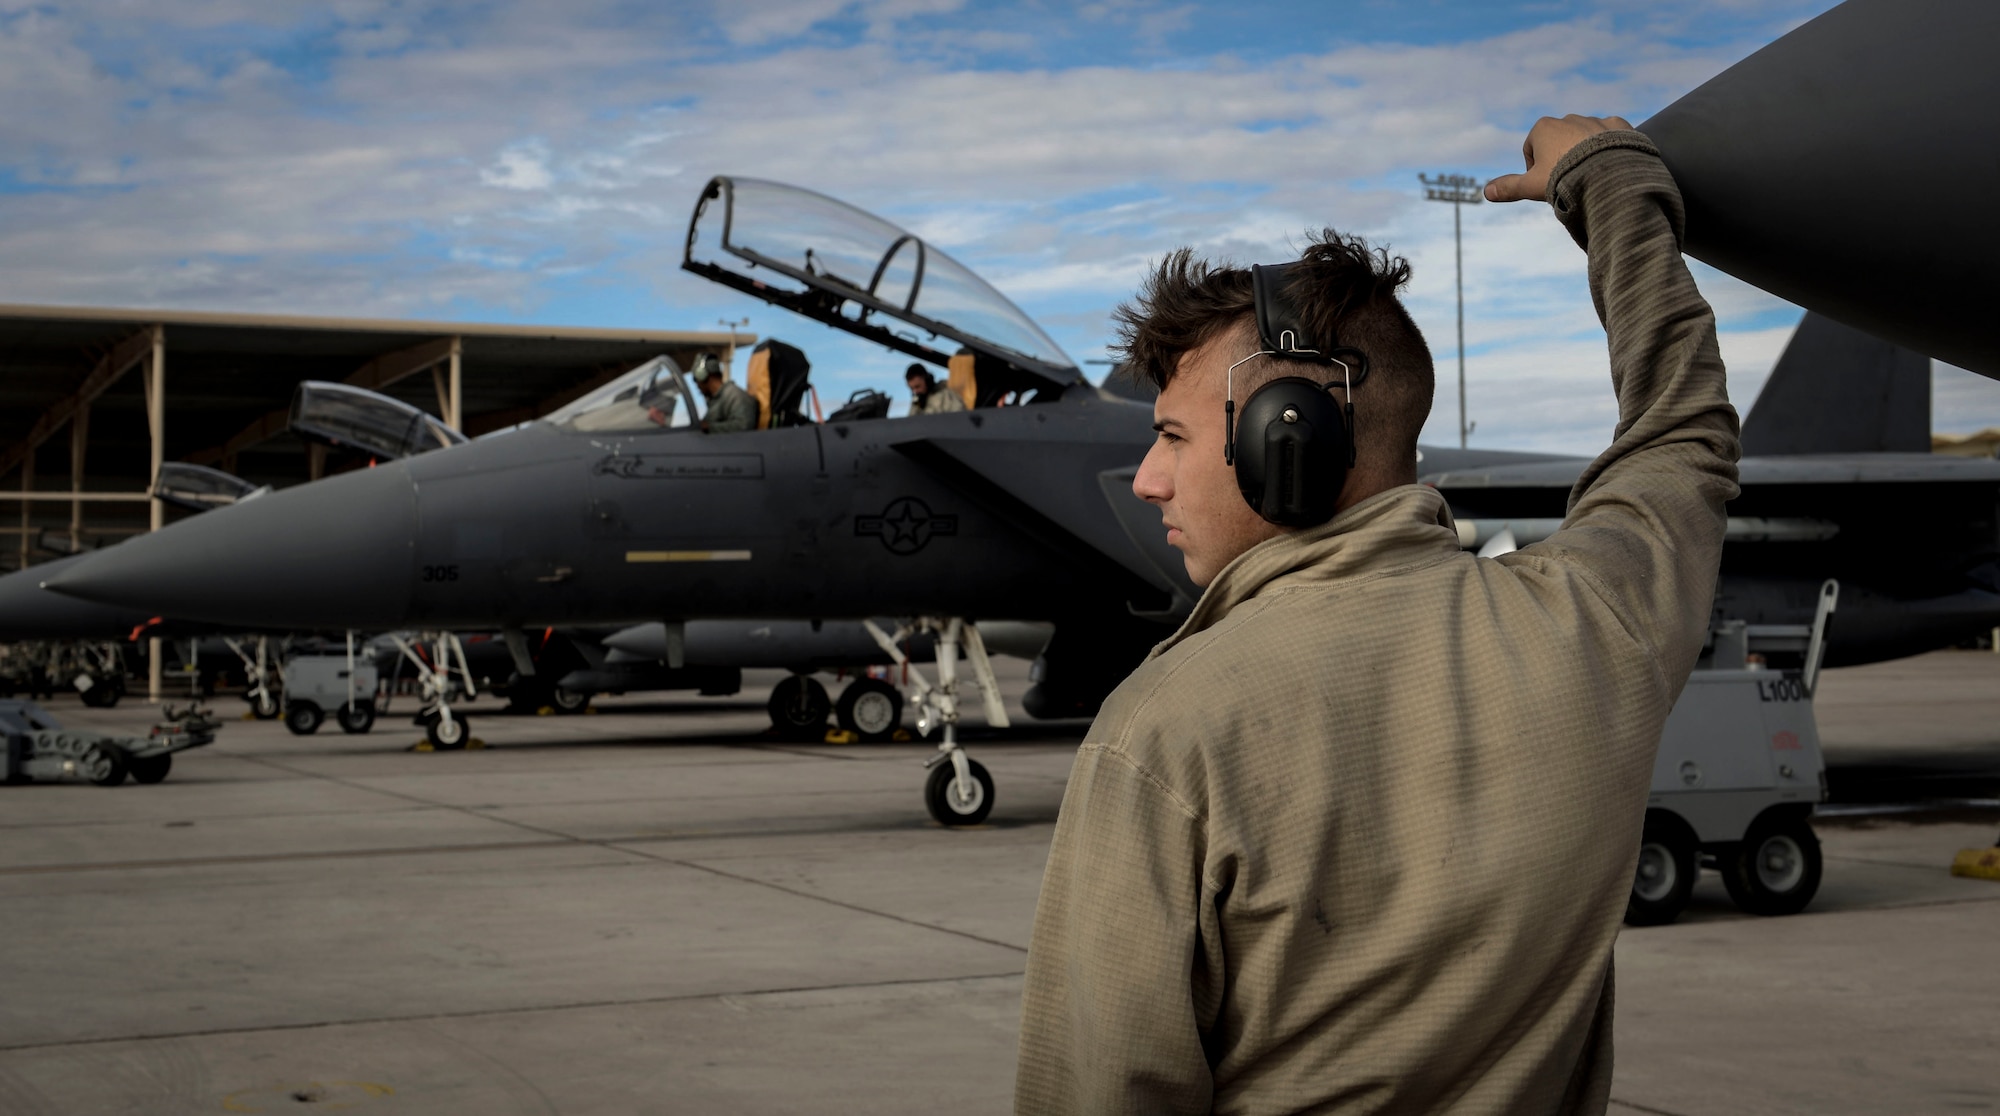 Airman 1st Class Clayton Ackerman, 757th Aircraft Maintenance Squadron (AMXS) Strike Aircraft Maintenance Unit F-15E Strike Eagle fighter jet maintainer, looks on as an F-15E prepares to launch Dec. 4, 2018 at Nellis Air Force Base, Nevada. The 757th AMXS participated alongside their pilots during the Weapons School Integration. (U.S. Air Force photo by Airman 1st Class Bailee A. Darbasie)